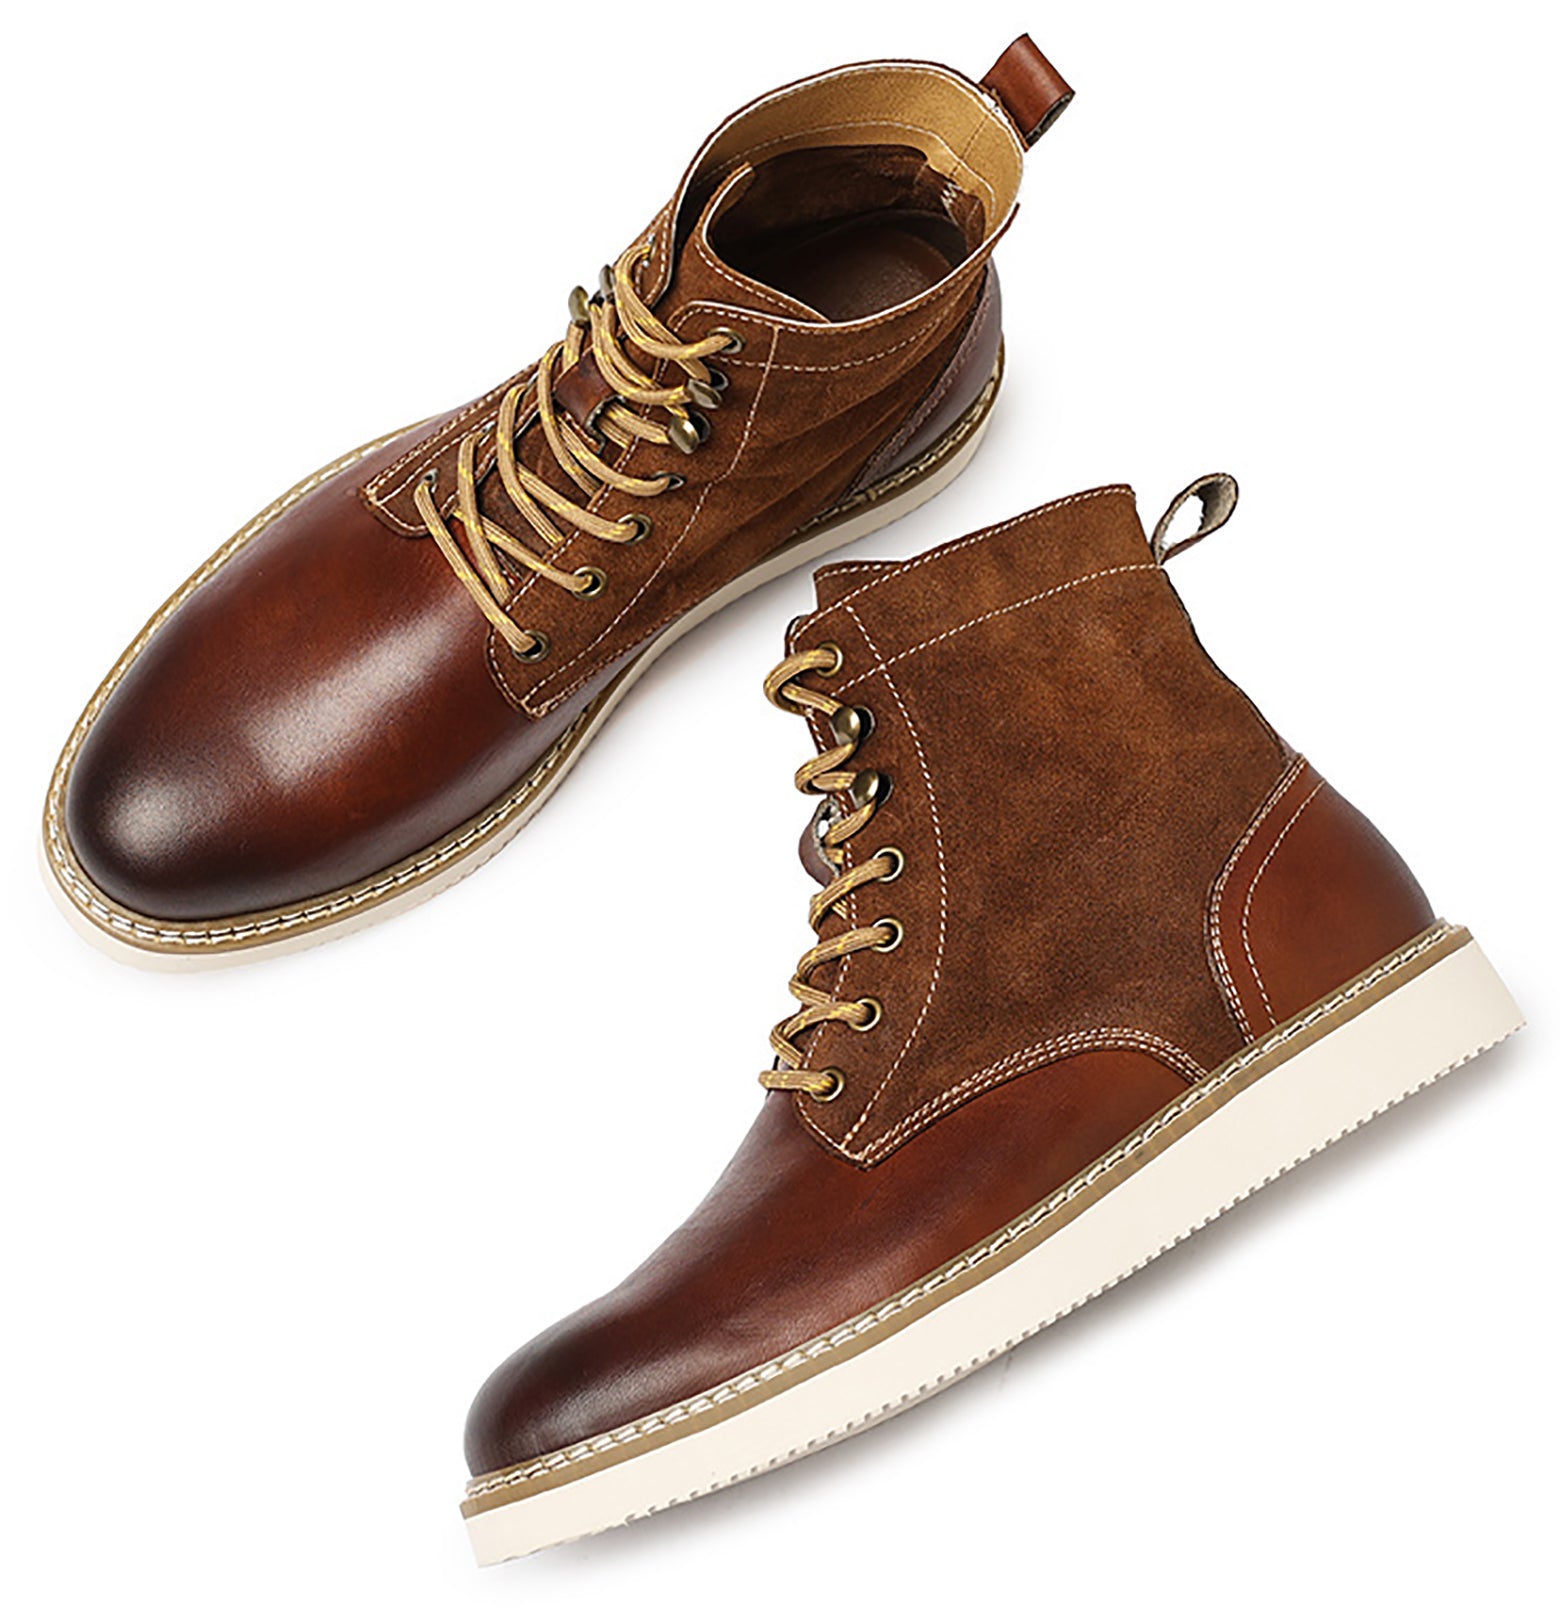 Men's Genuine Leather Lace Up Casual Dress Boots